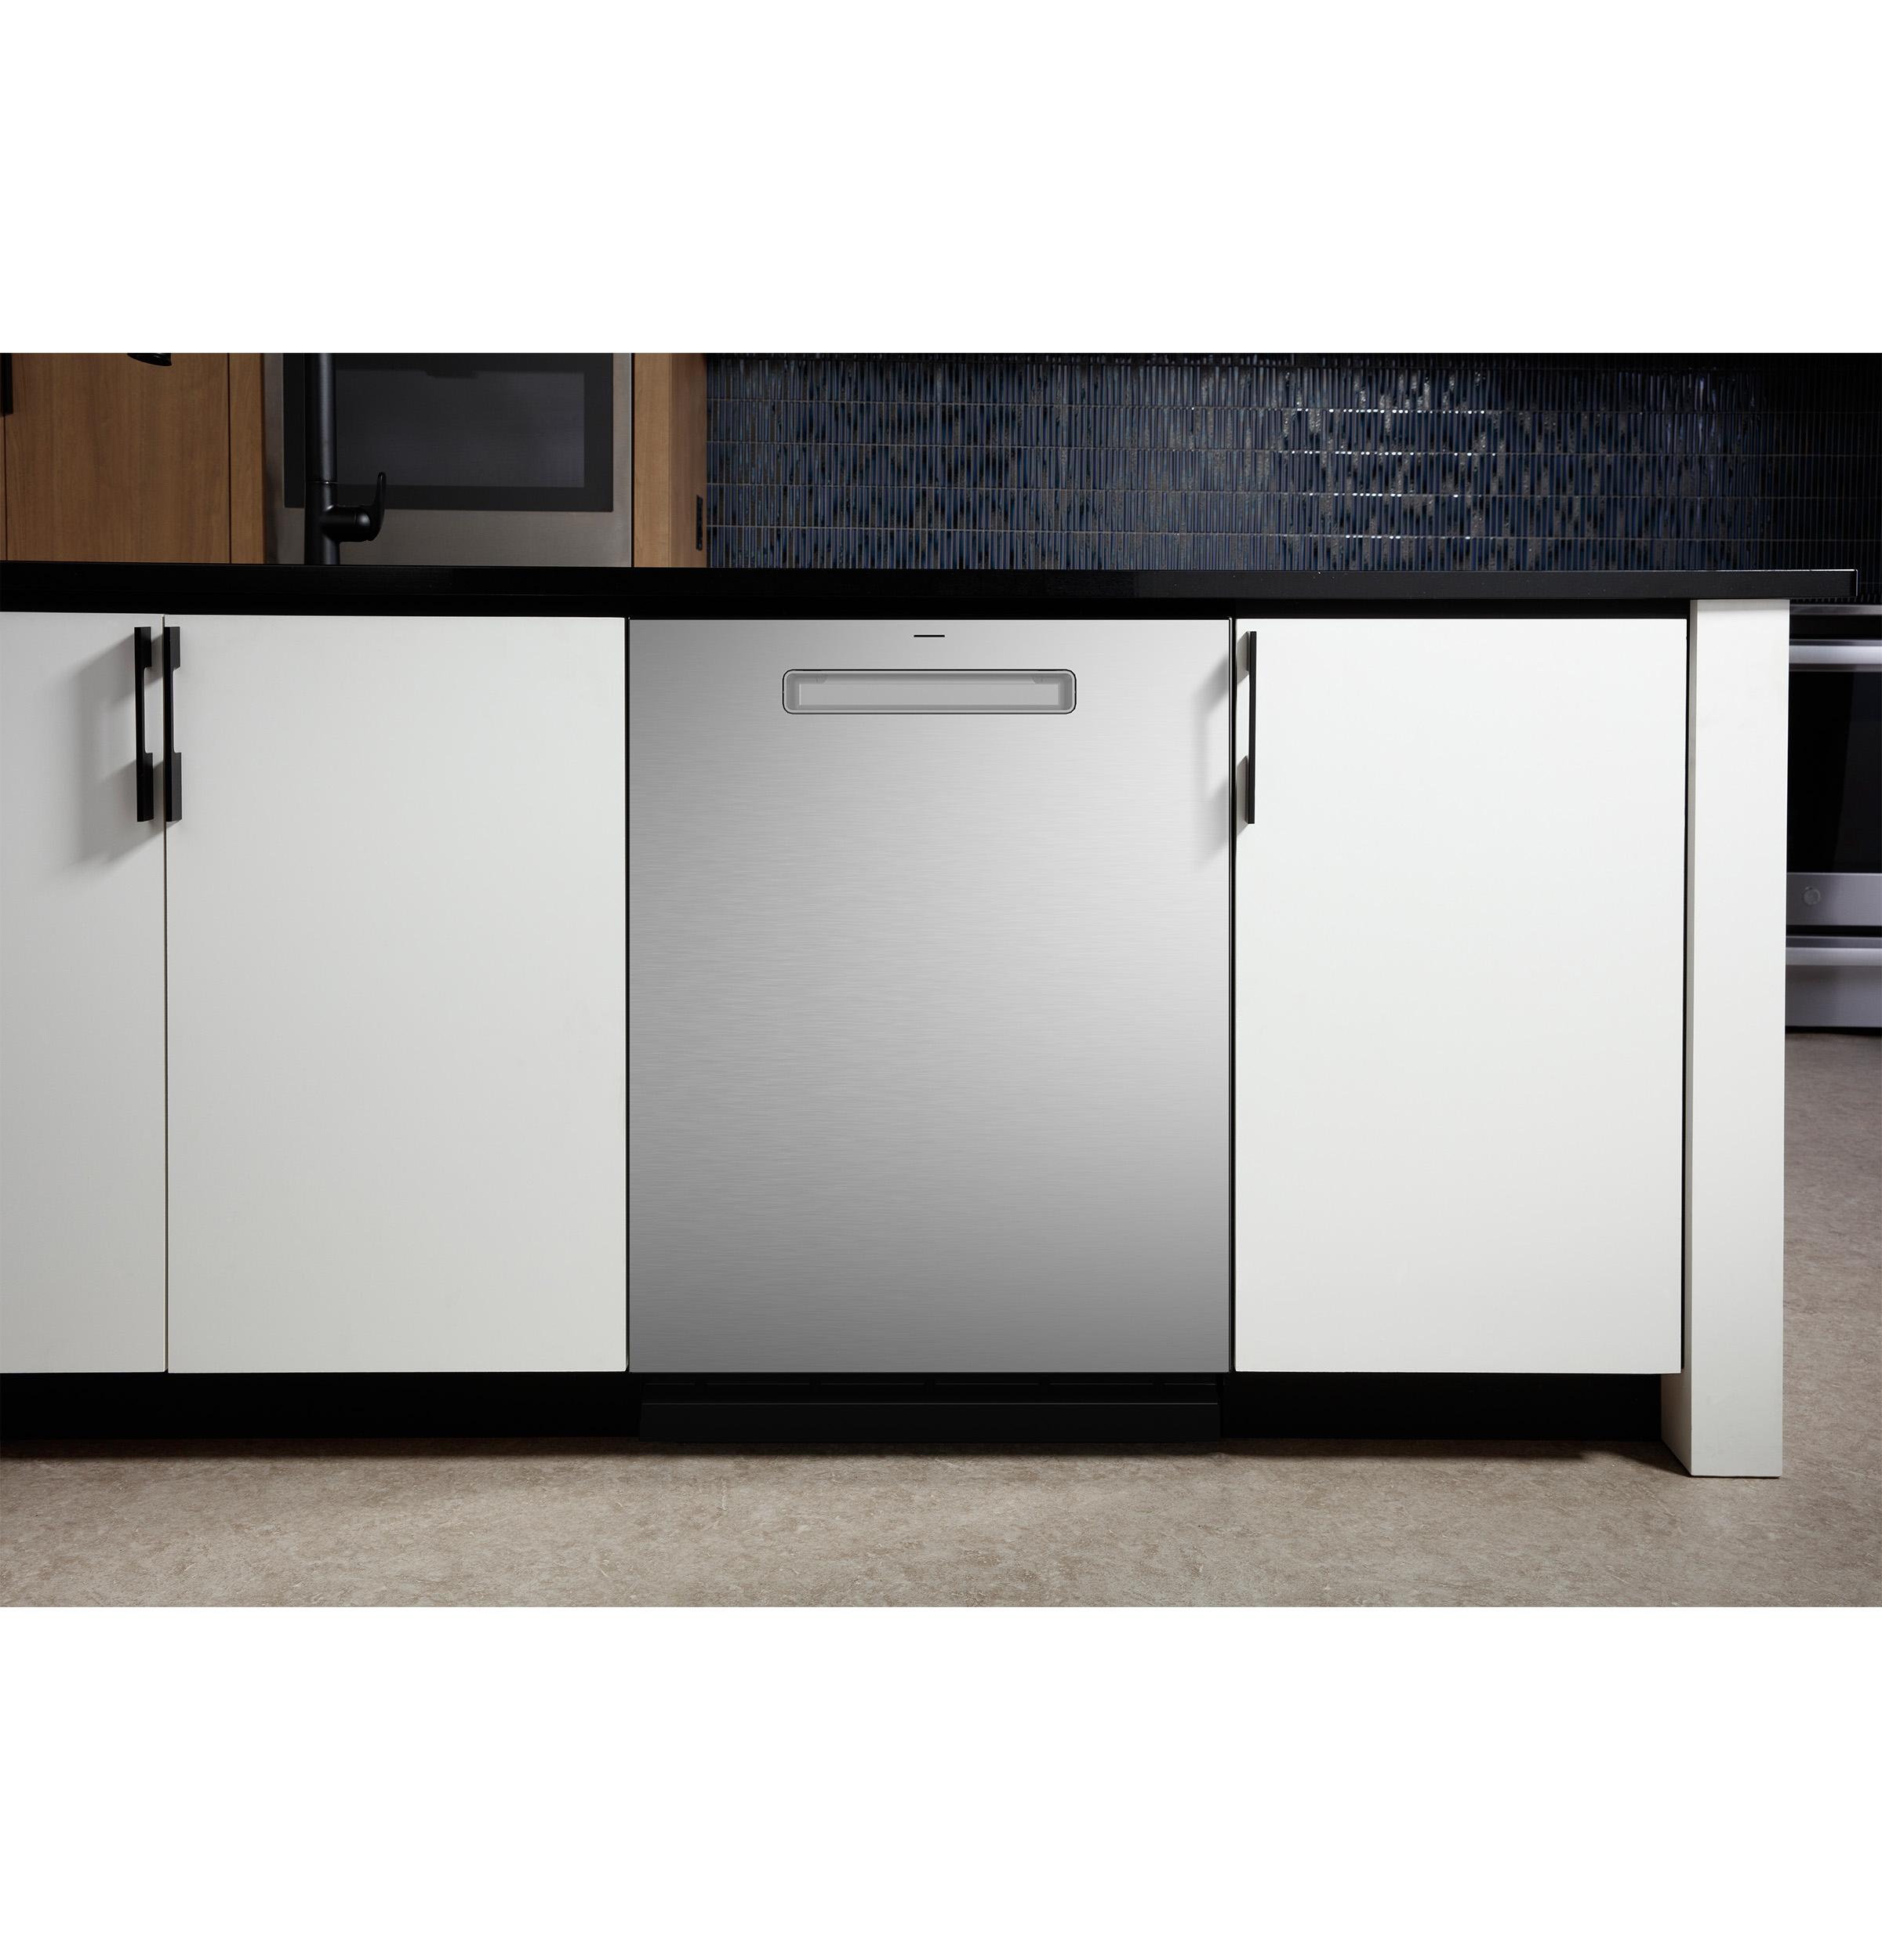 GE Profile™ ENERGY STAR Smart UltraFresh System Dishwasher with Microban™ Antimicrobial Technology with Deep Clean Washing 3rd Rack, 39 dBA